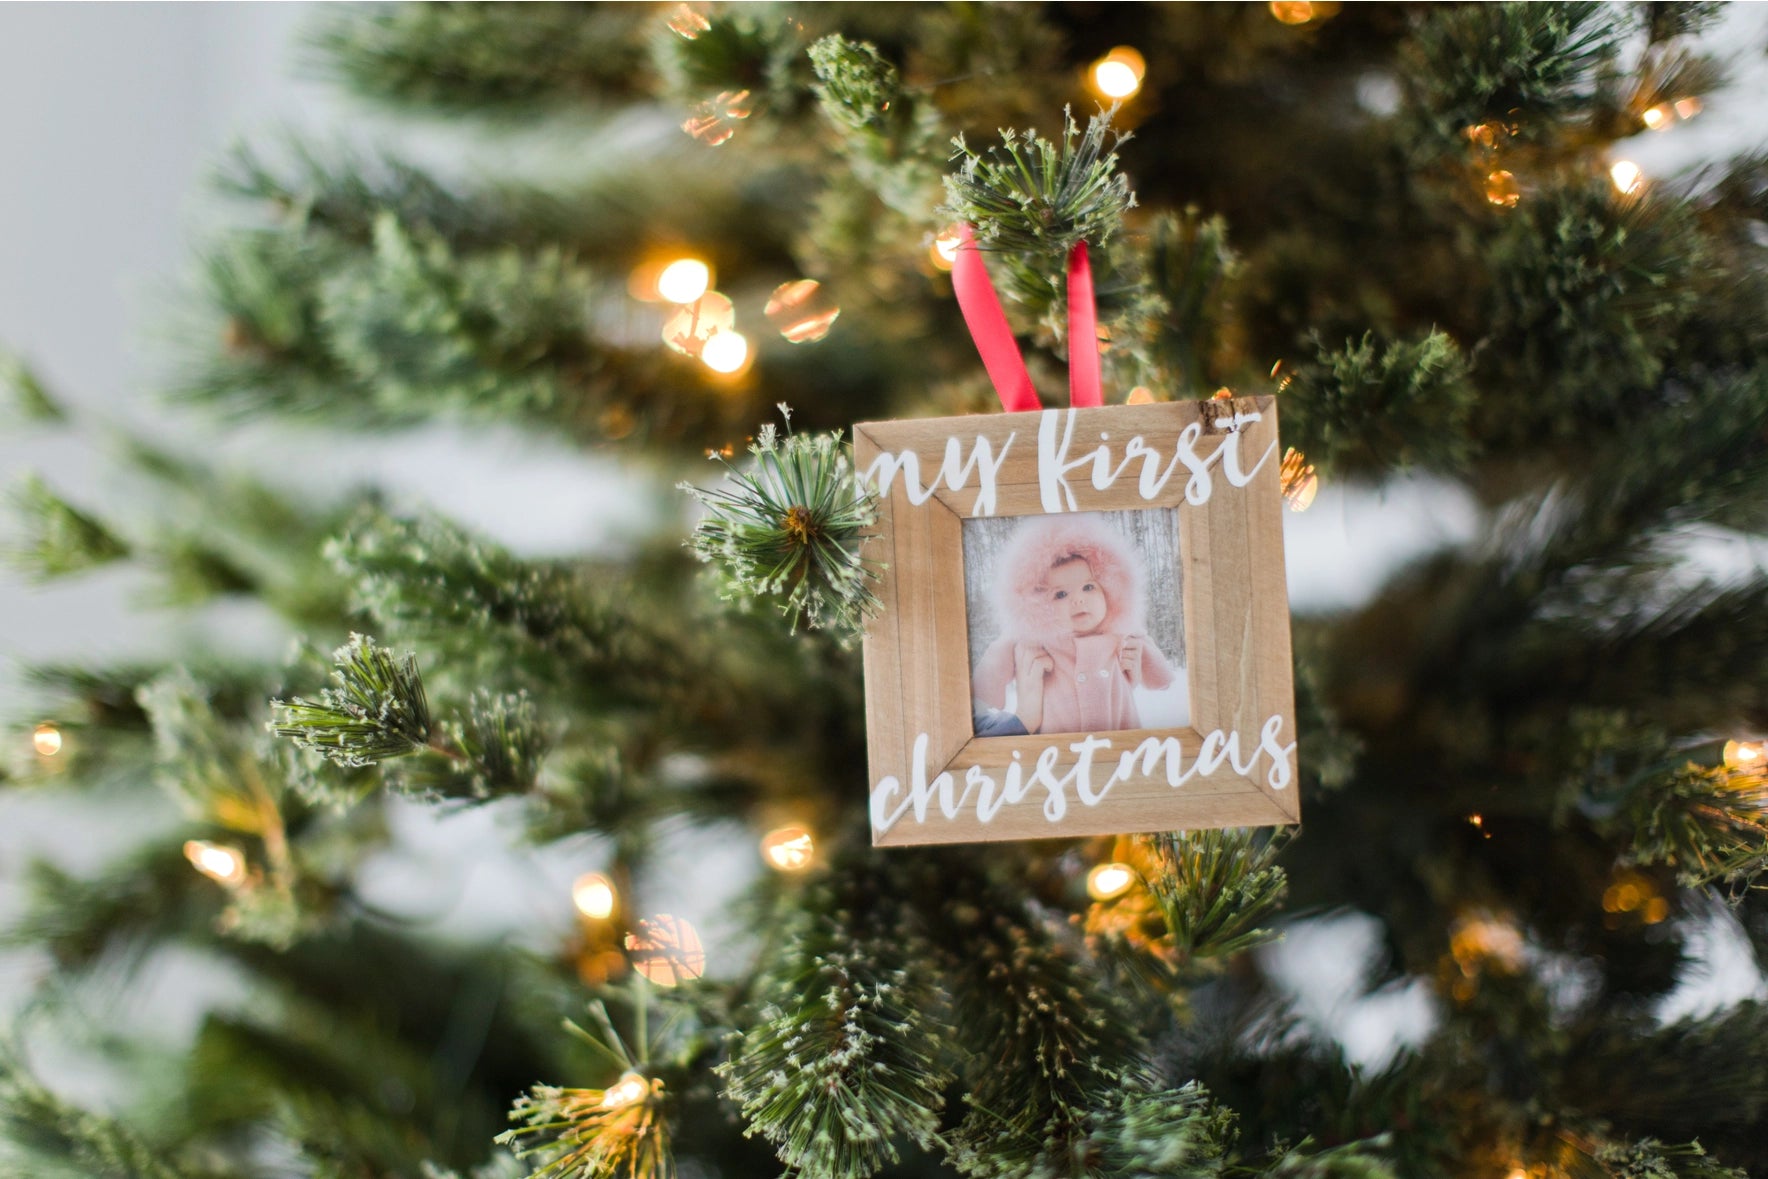 My First Christmas Frame Ornament  - Doodlebug's Children's Boutique